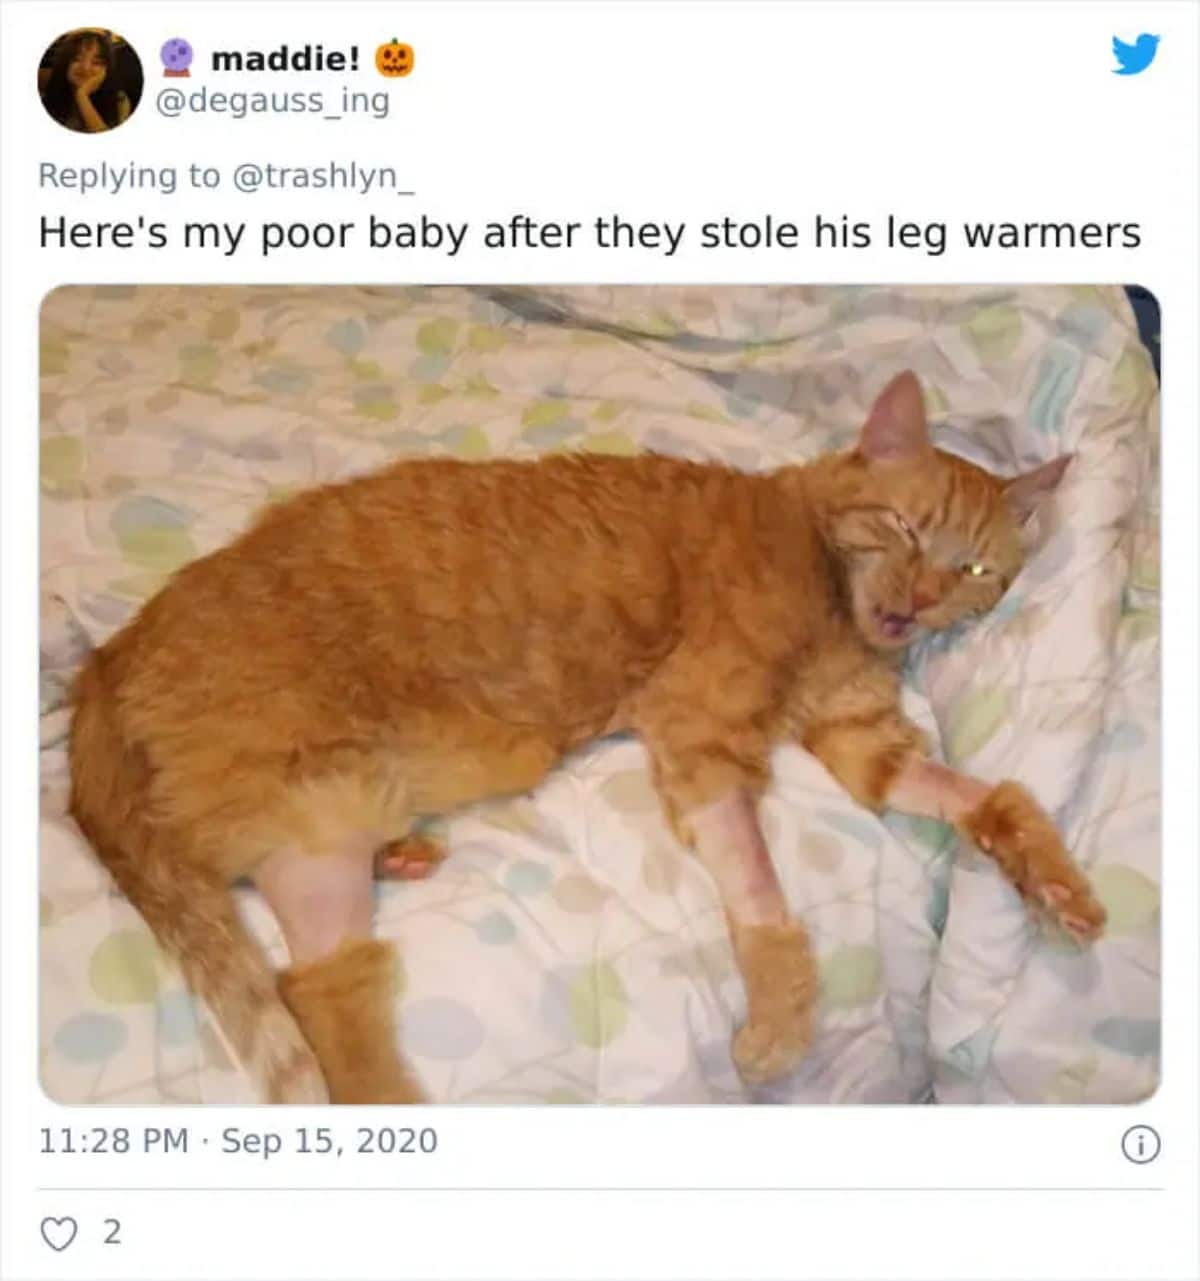 tweet of a photo of an orange cat laying on a white patterned bed with the top half of the legs shaved